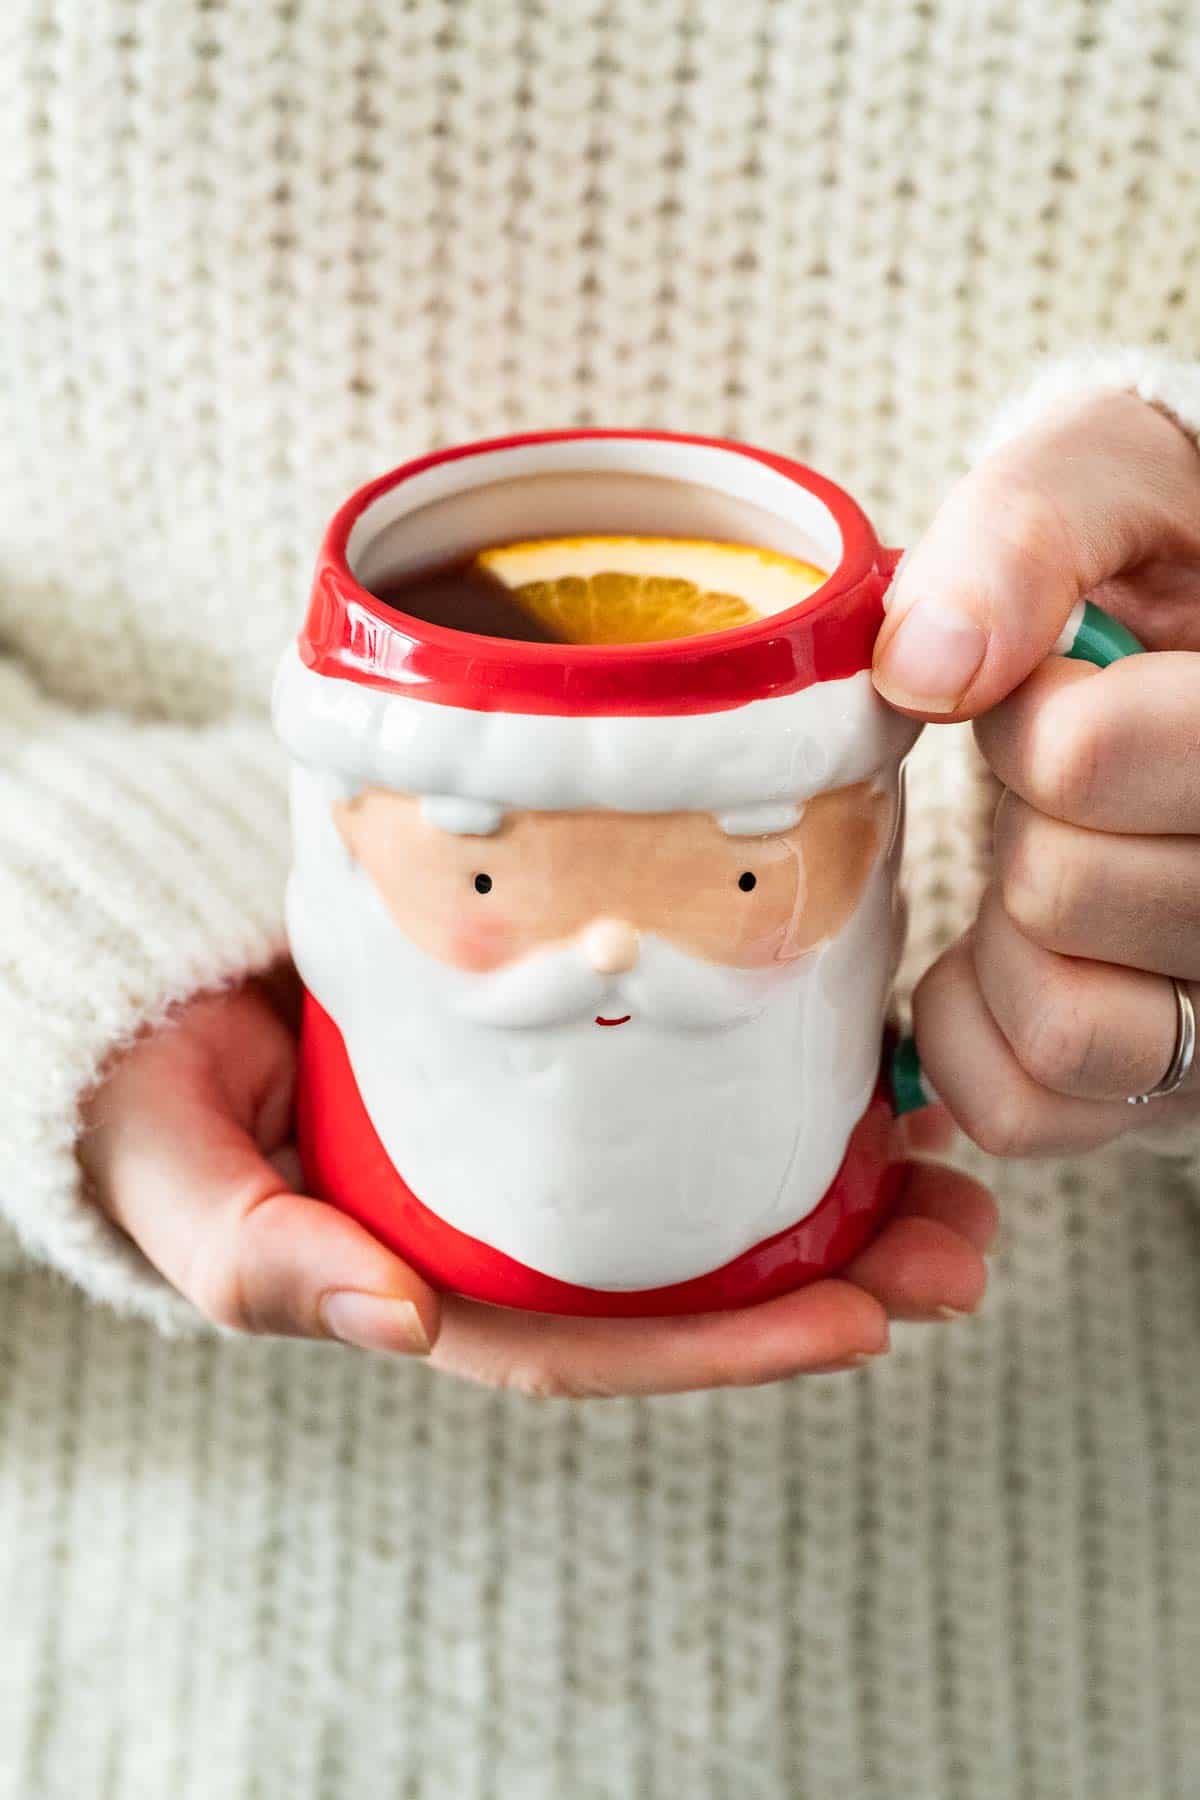 Two hands holding a Santa-shaped mug filled with Kinderpunsch.